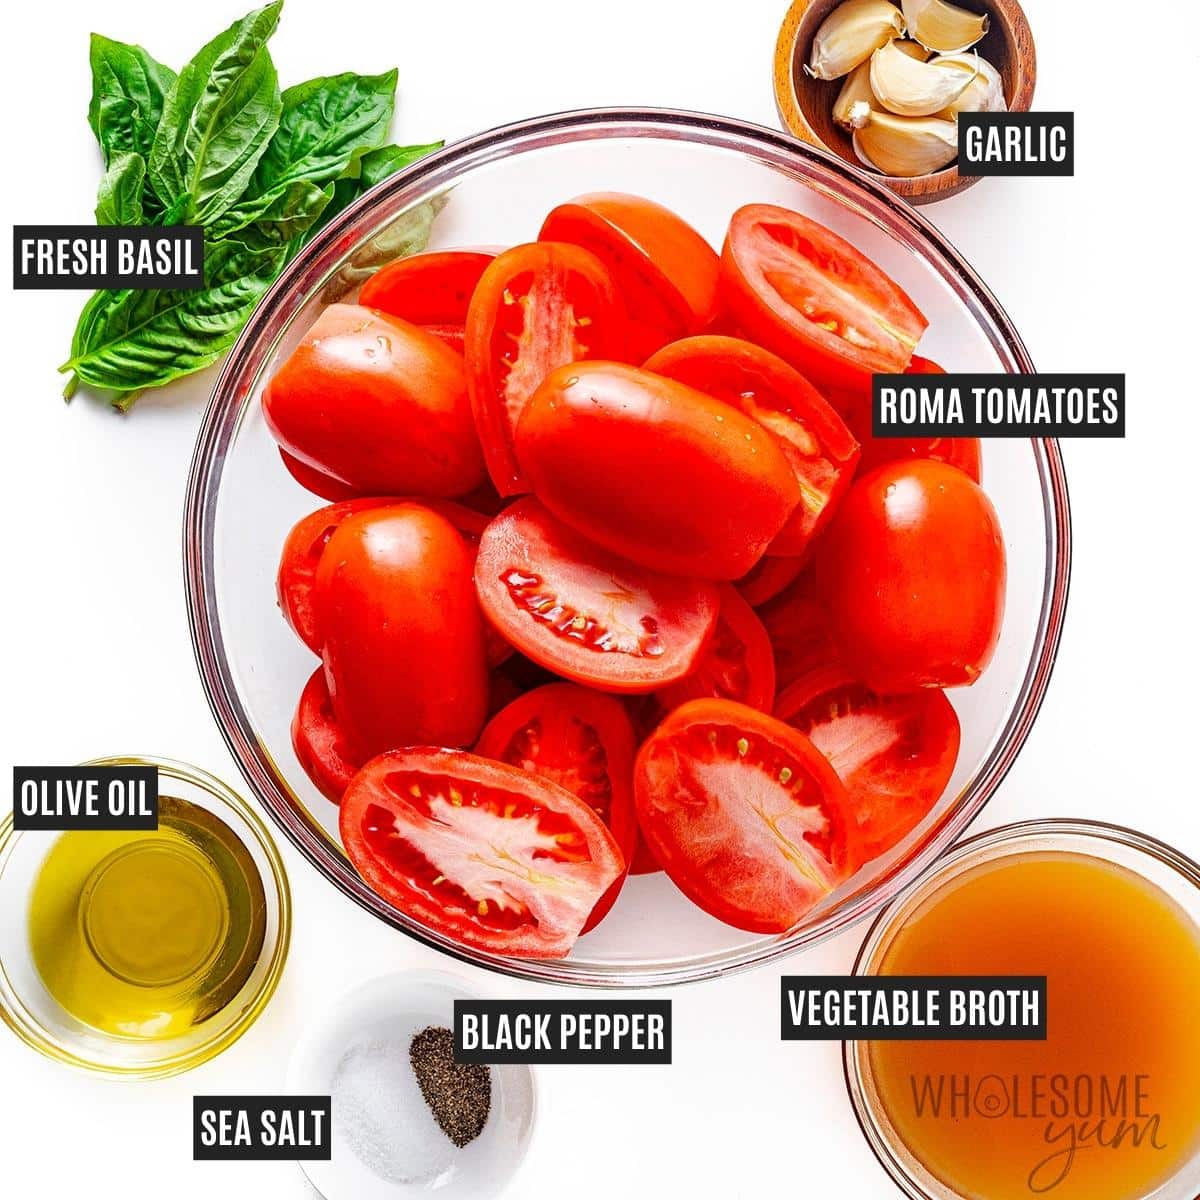 Roasted tomato soup recipe ingredients.